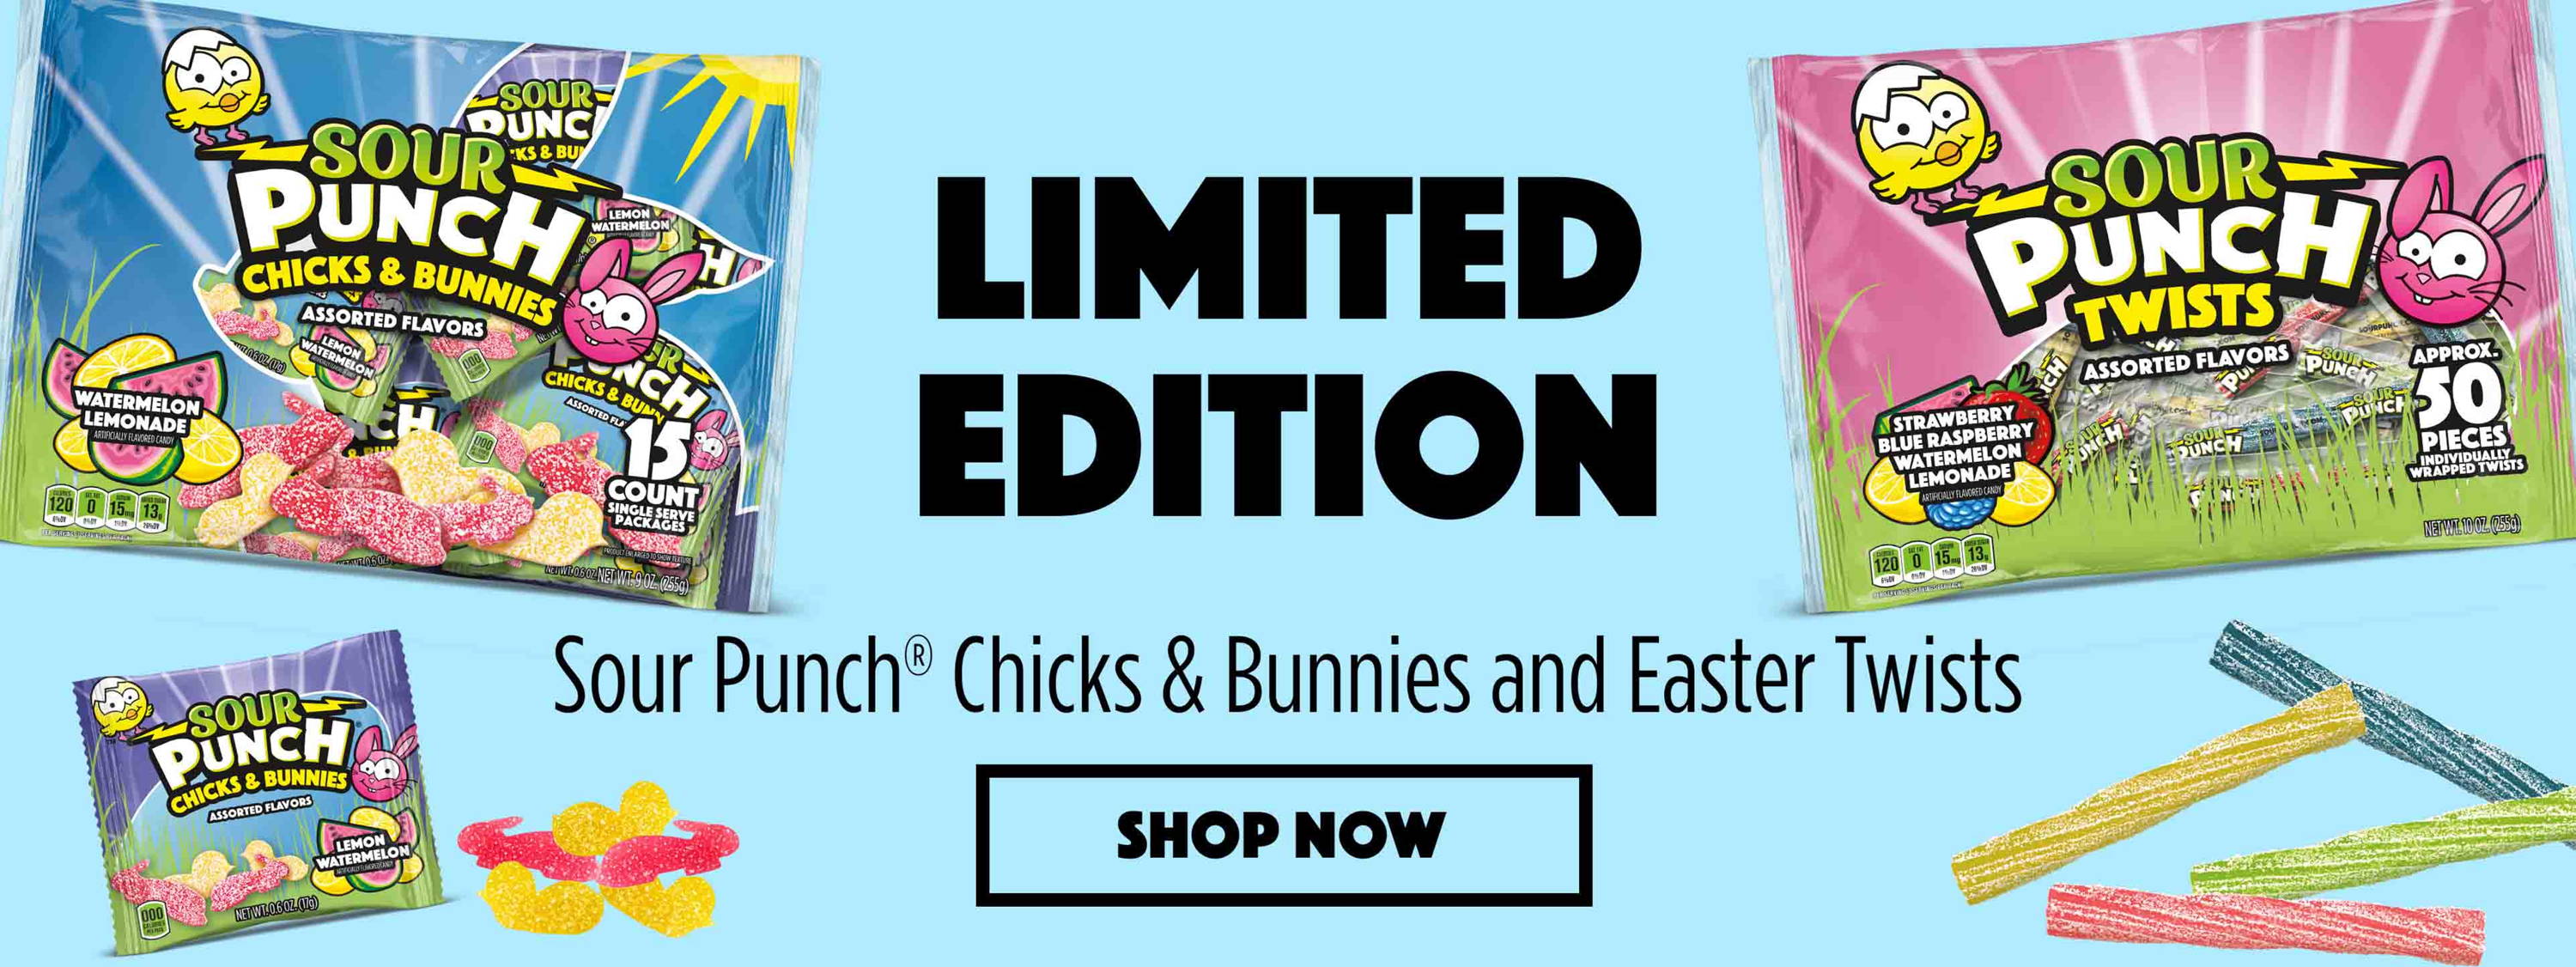 LIMITED EDITION Sour Punch Chicks & Bunnies and Easter Twists